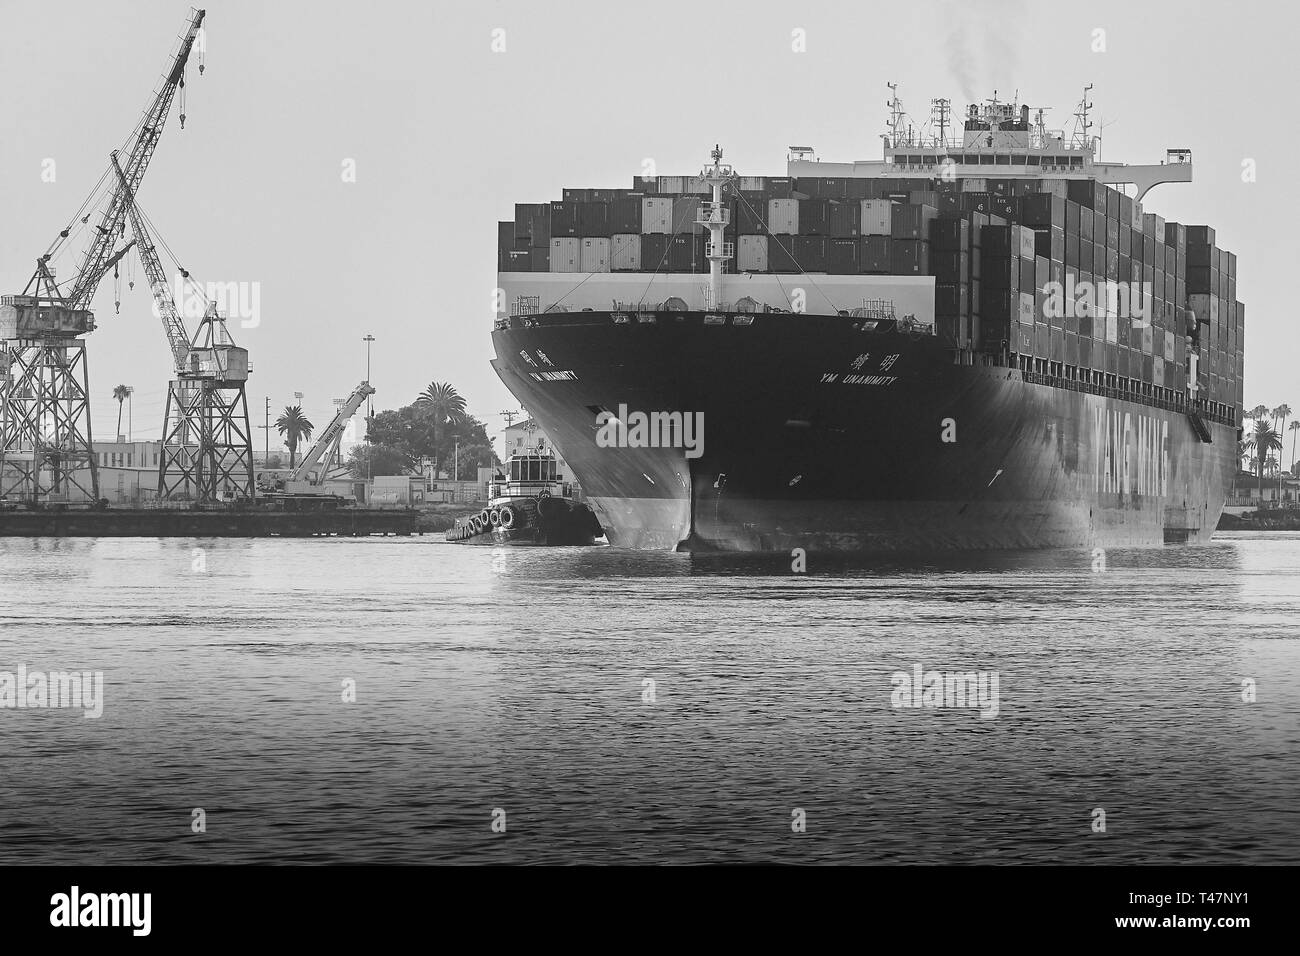 Black And White Photo Of The Container Ship, YM UNANIMITY, Steams Through The Narrow Los Angeles Main Channel To The Port Of Los Angeles, California Stock Photo